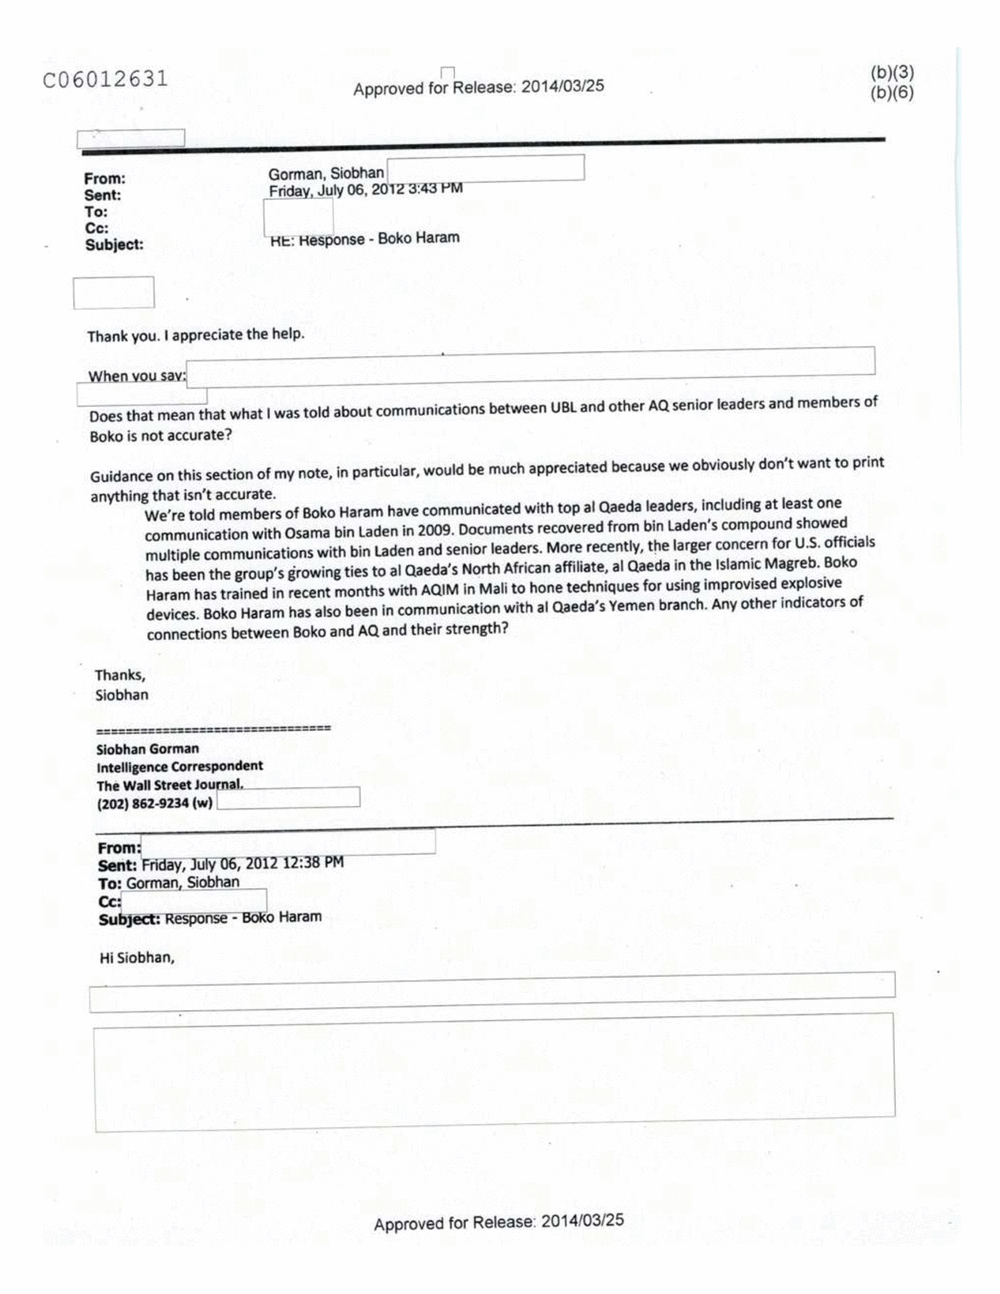 Page 189 from Email Correspondence Between Reporters and CIA Flacks